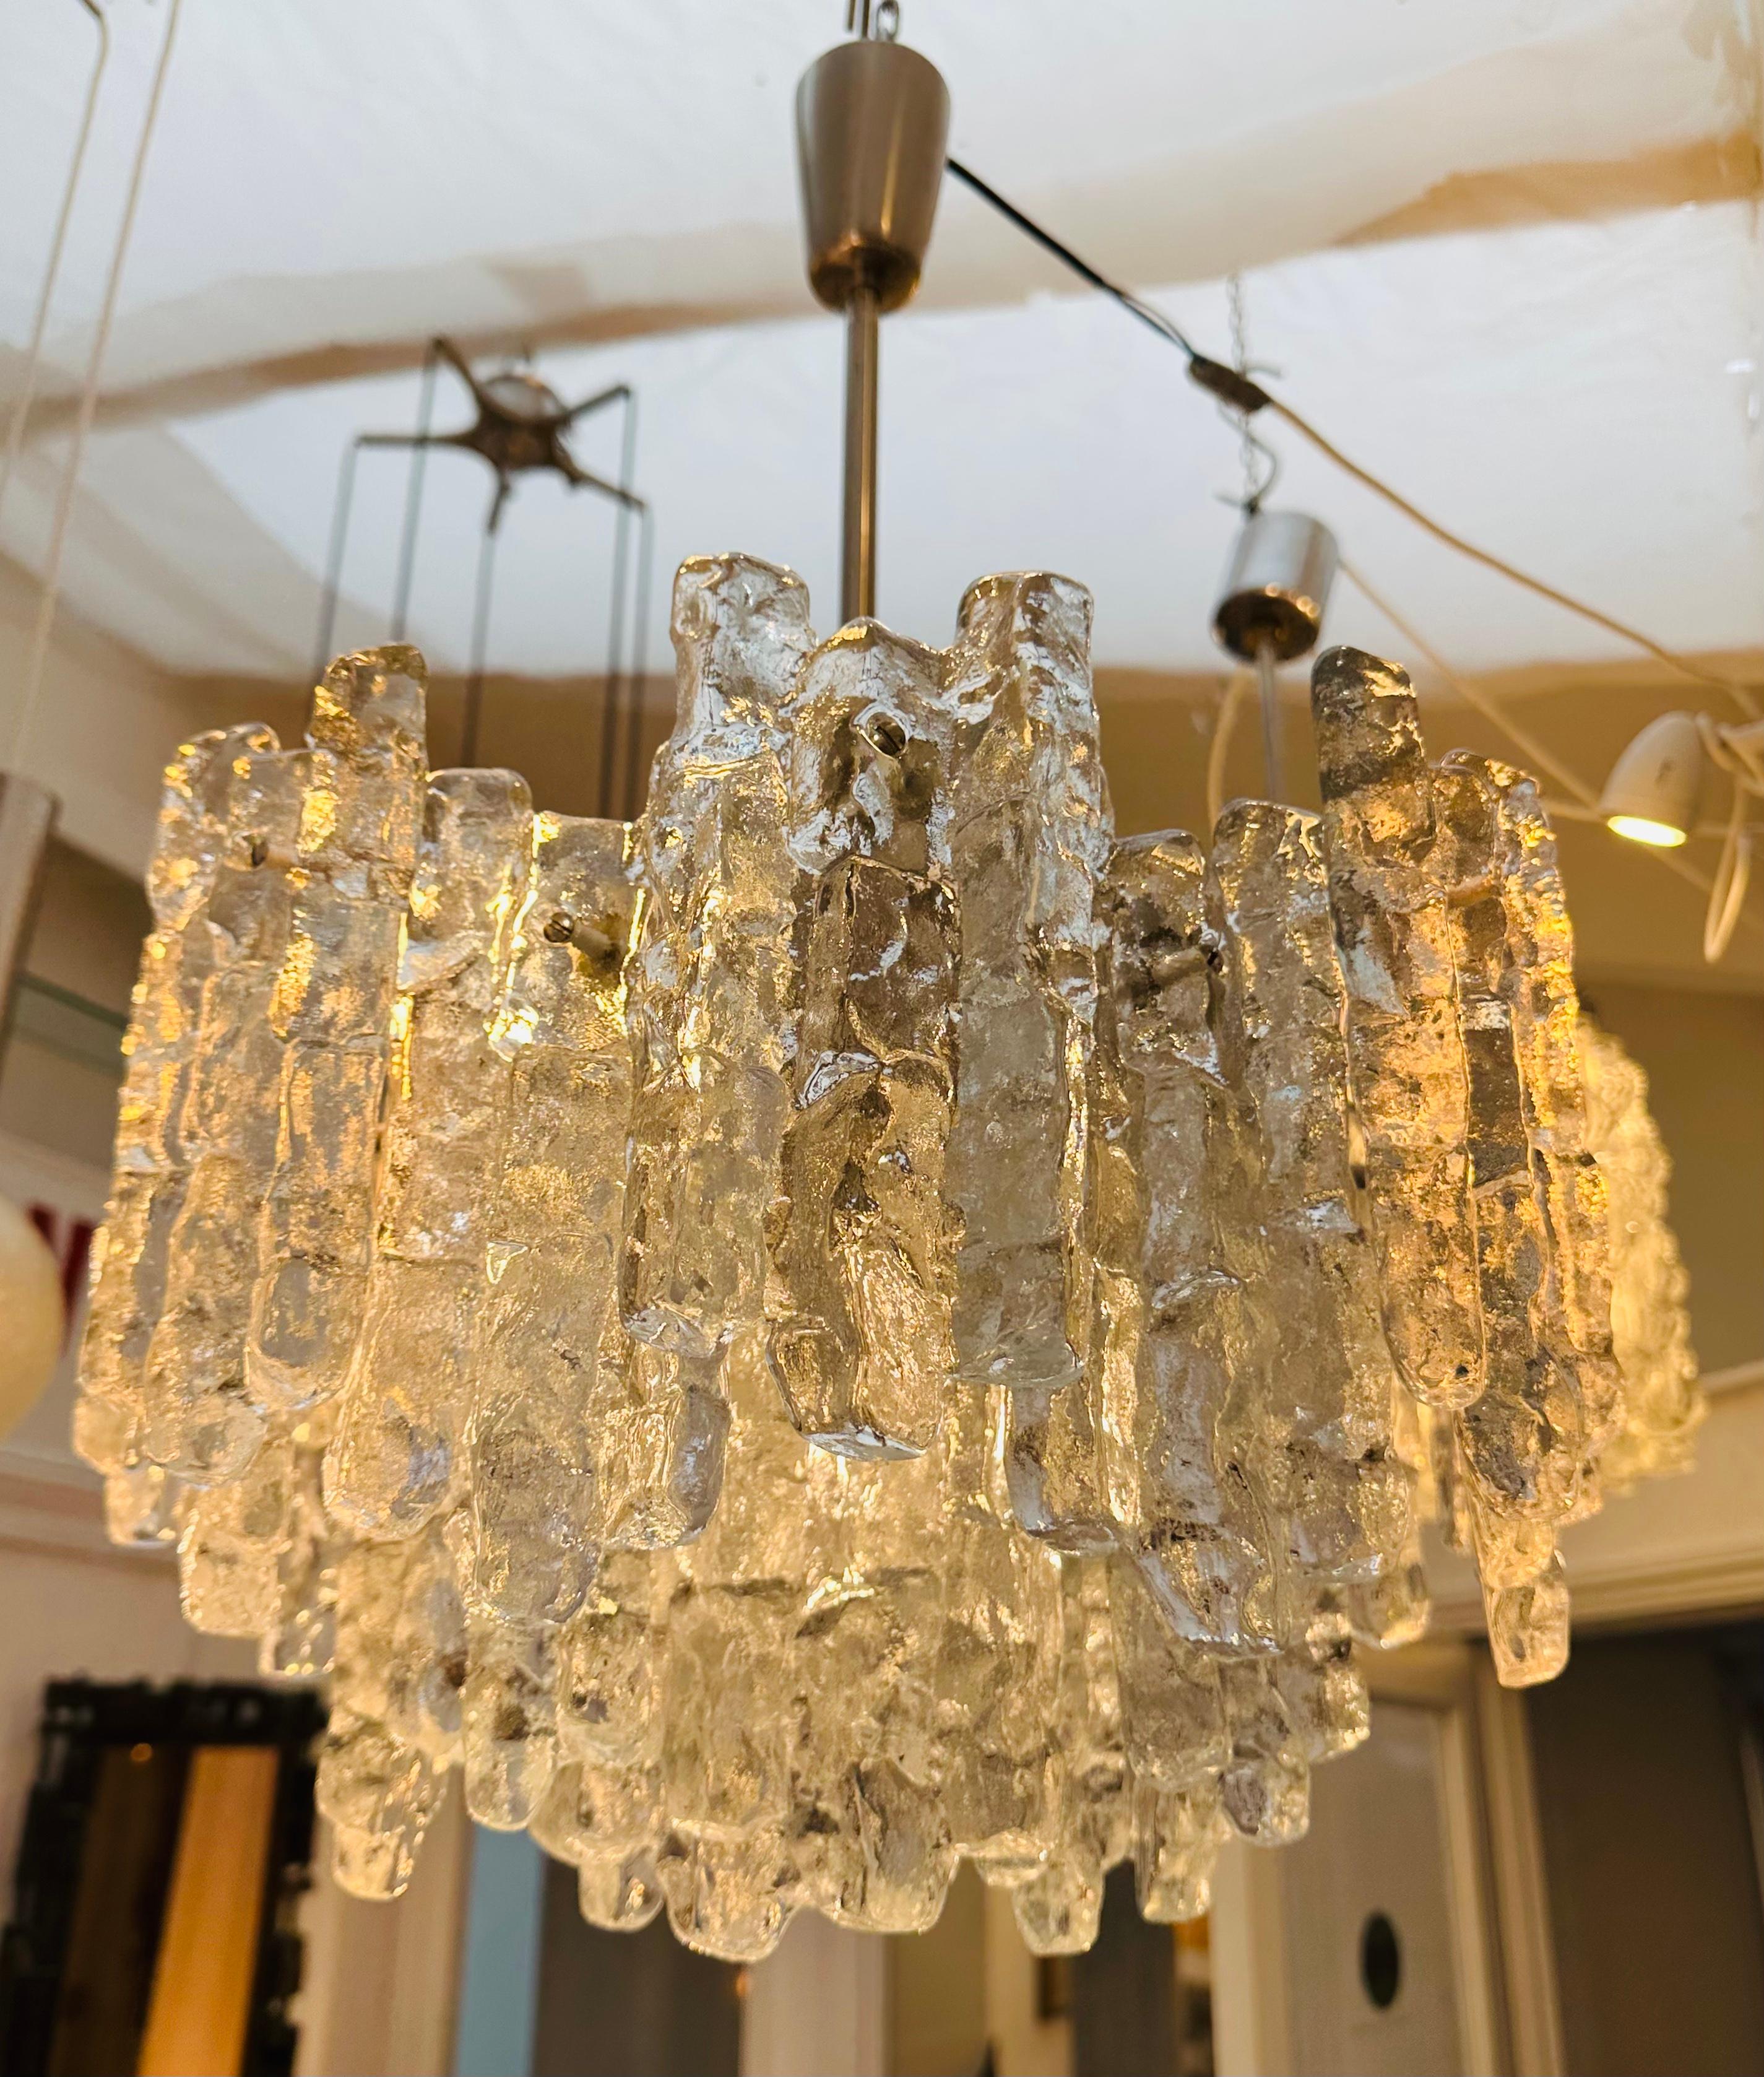 A striking and rather dramatic, two-tier, iced glass, chandelier which was manufactured by Kalmar Lighting in Austria in the 1970s from the SORIA range of lights. Designed by J.T Kalmar. Each piece of removable glass is secured onto the